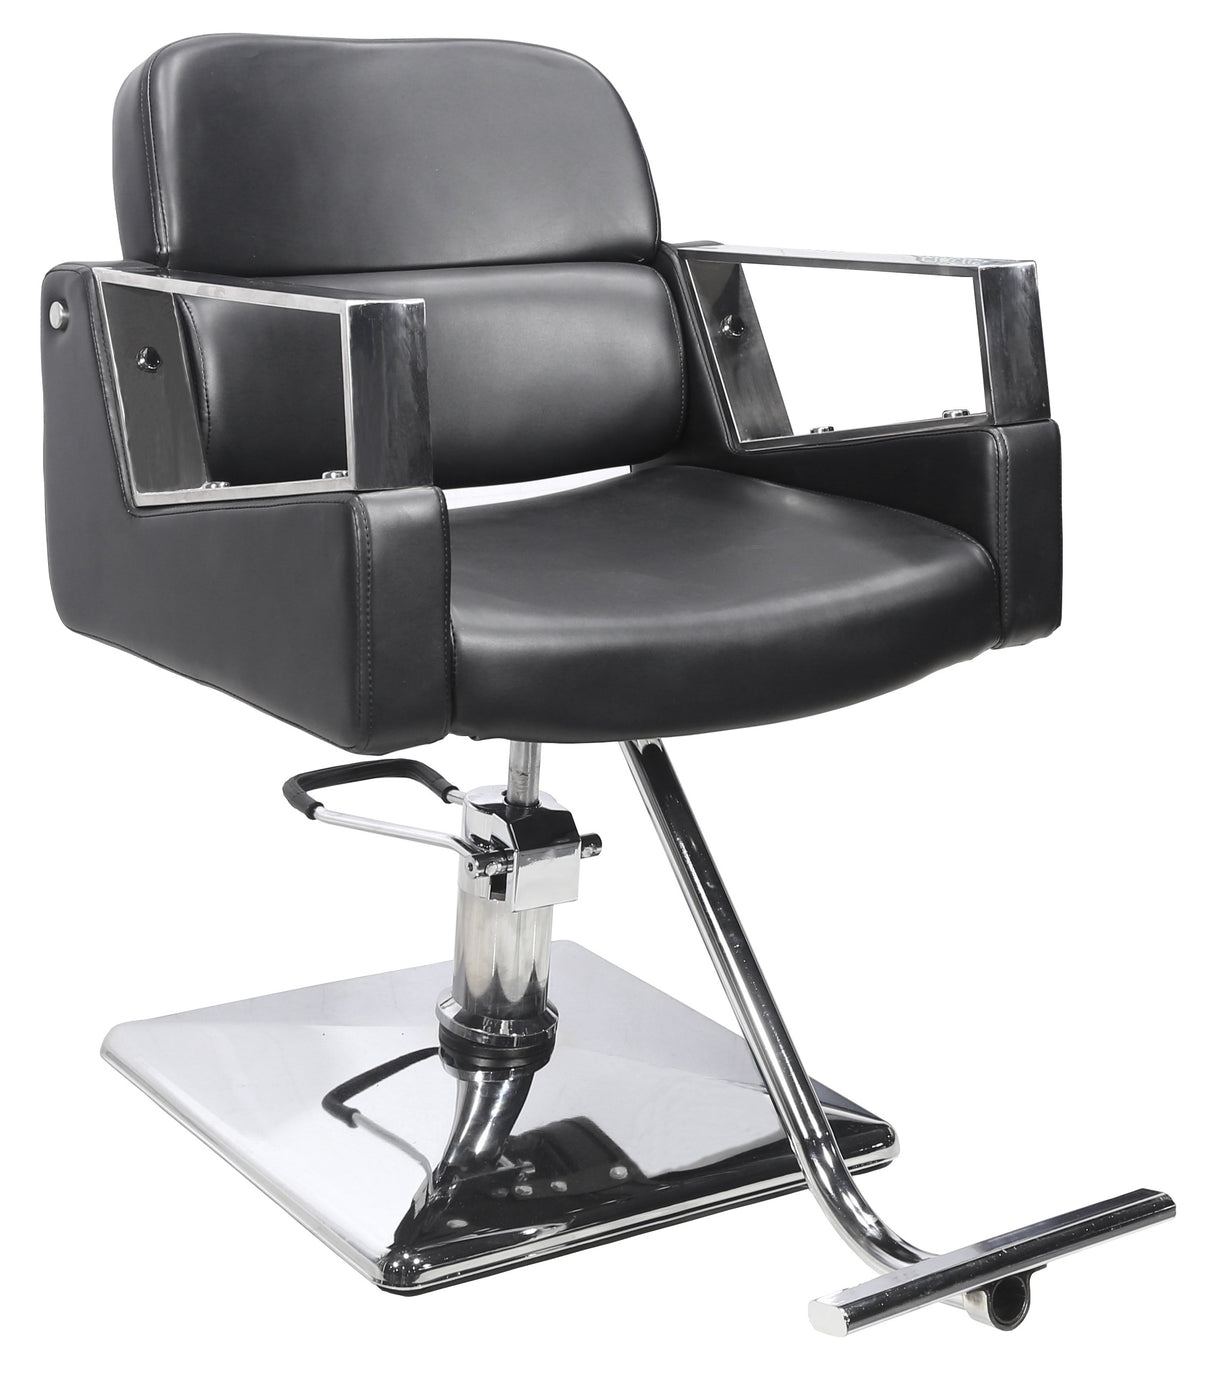 Model 642 Styling Chair With Modern Arm Rest With Extra Back Support